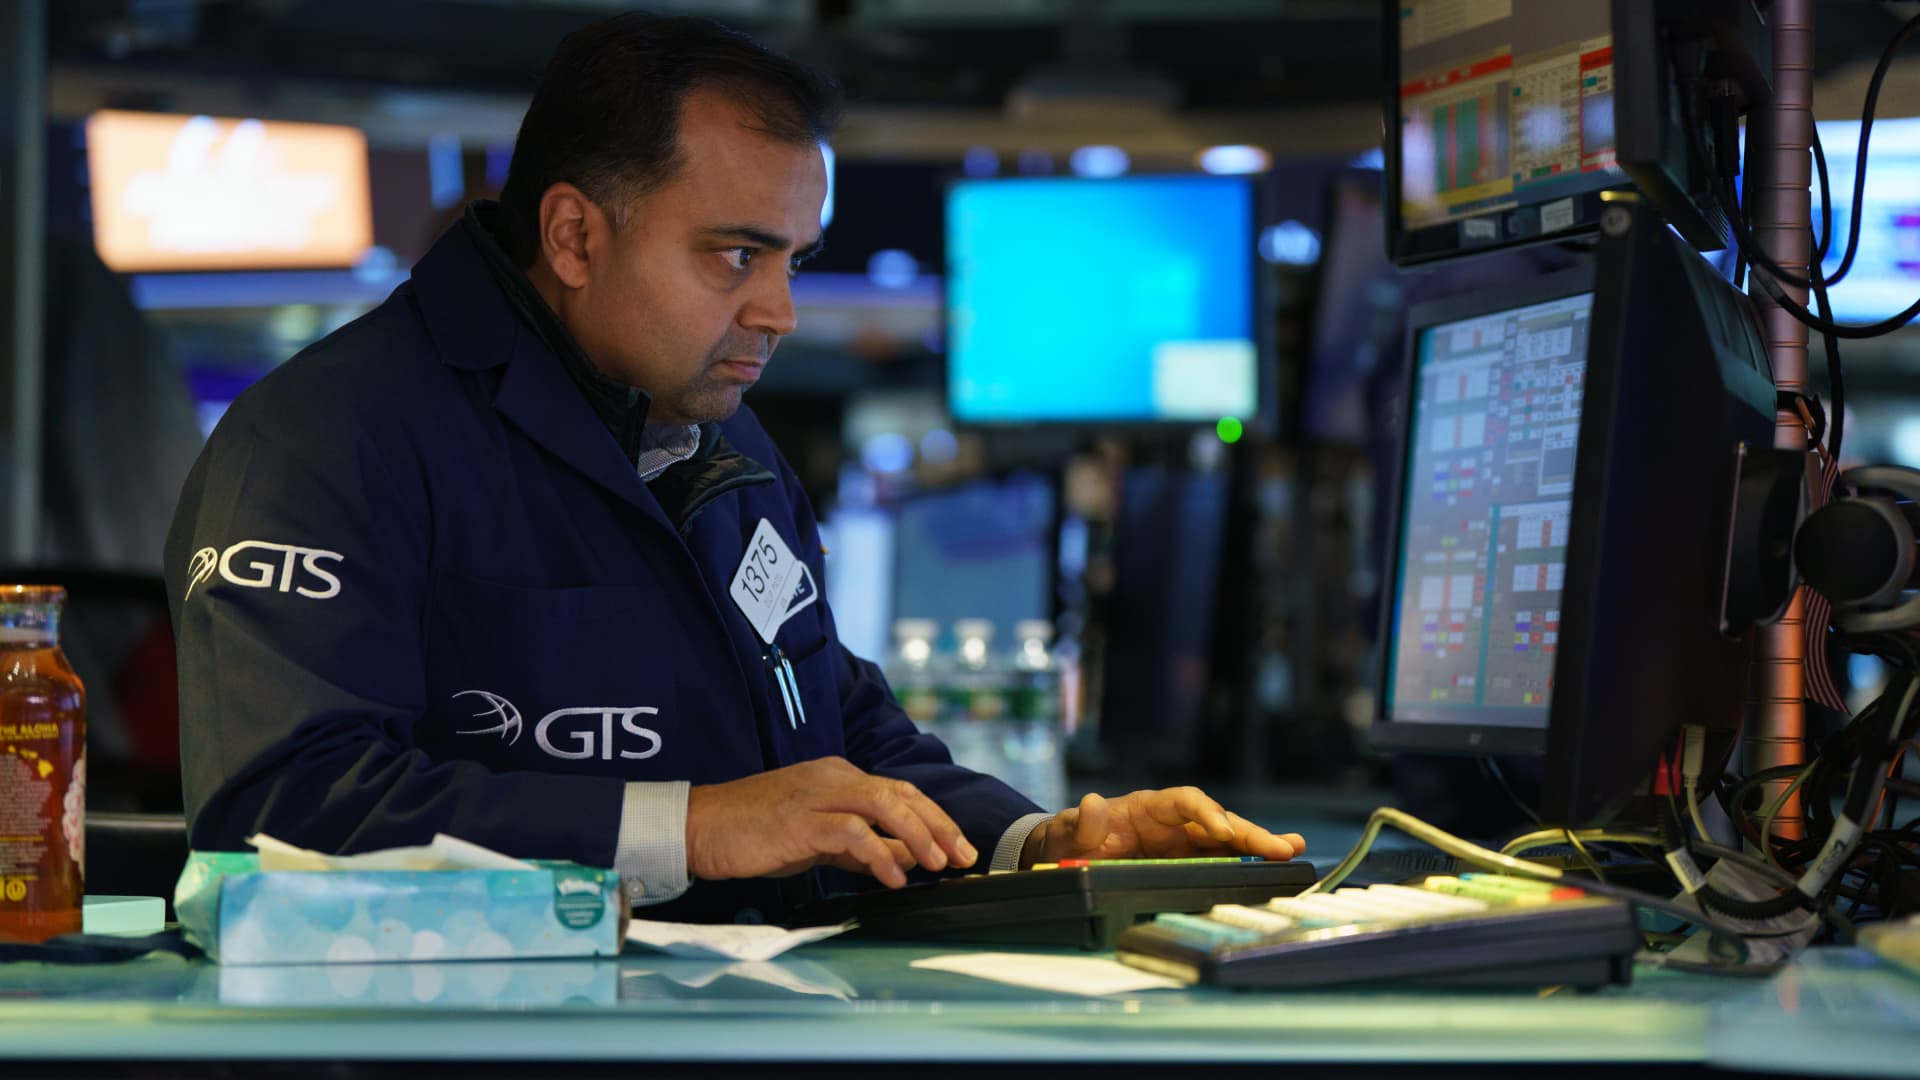 NYSE’s Tuesday trading glitch explained — Why some of the trades may be busted